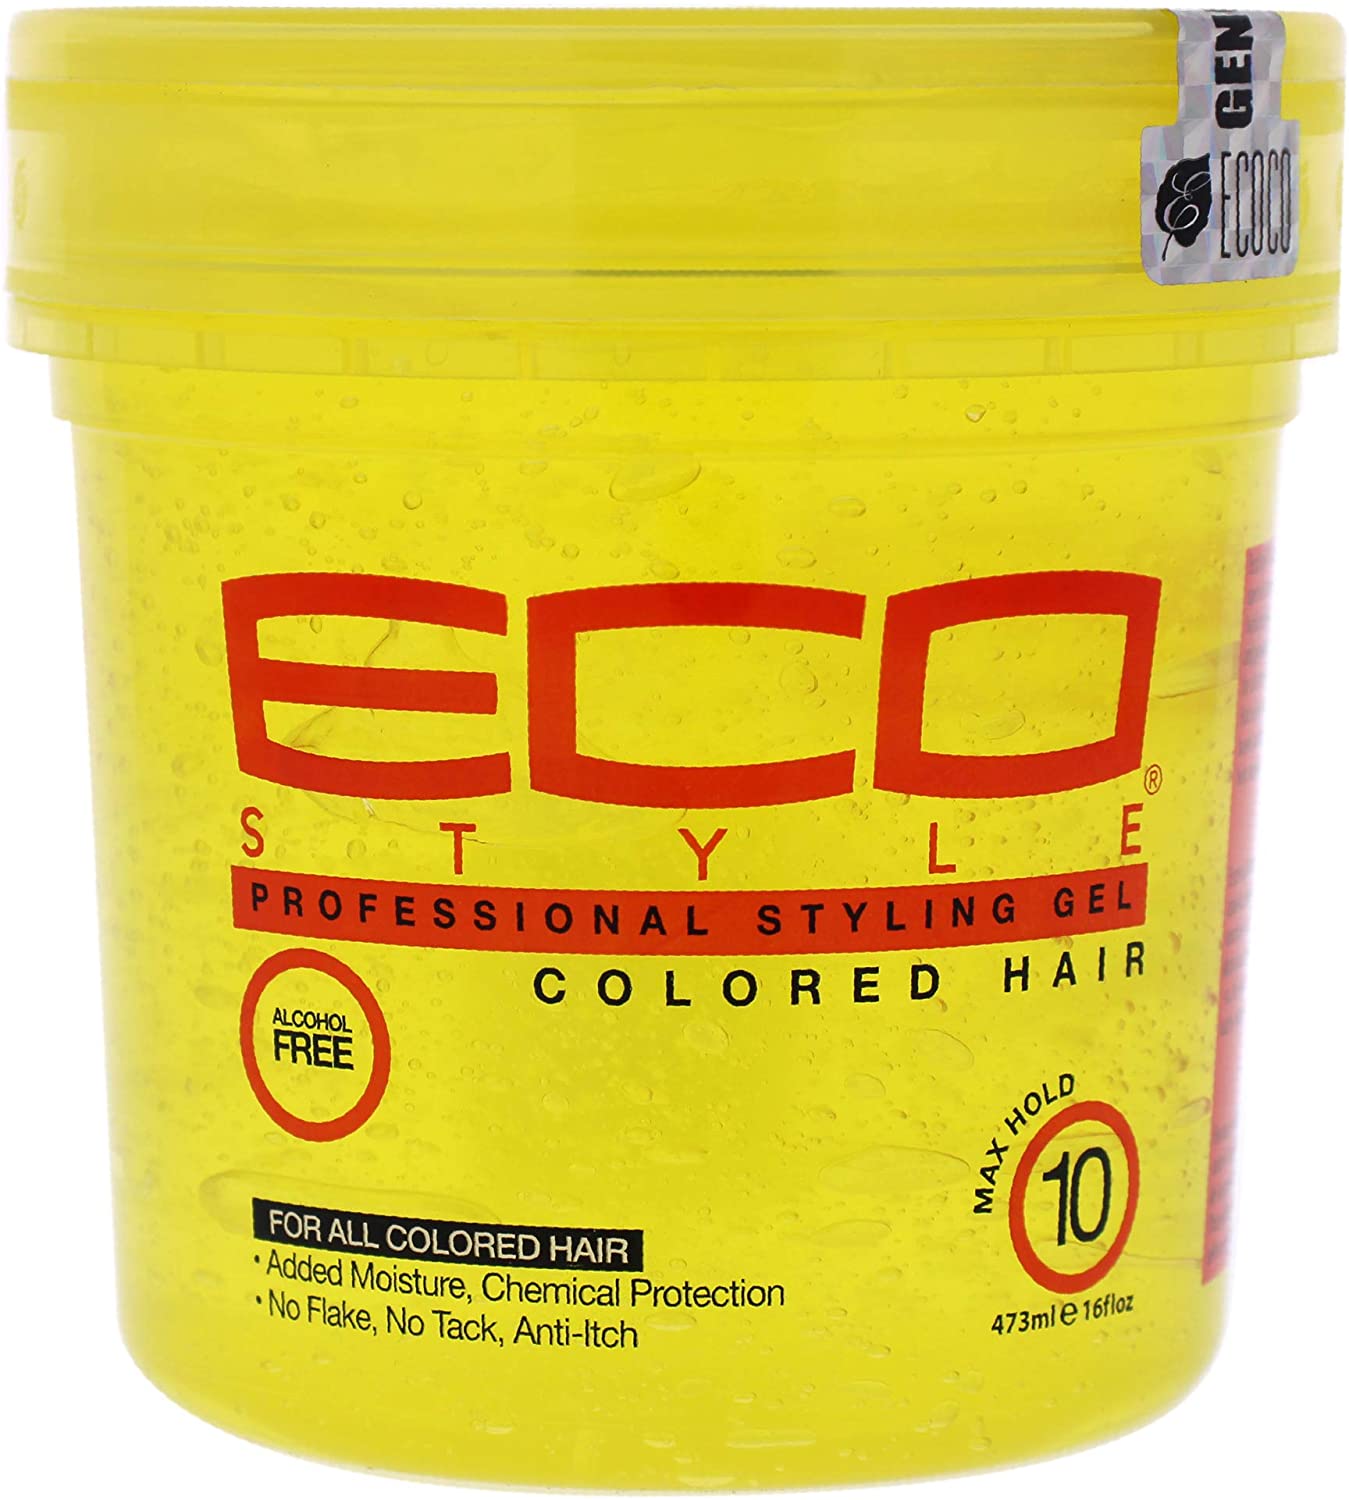 Eco Styler Professional Colored Hair Styling Gel